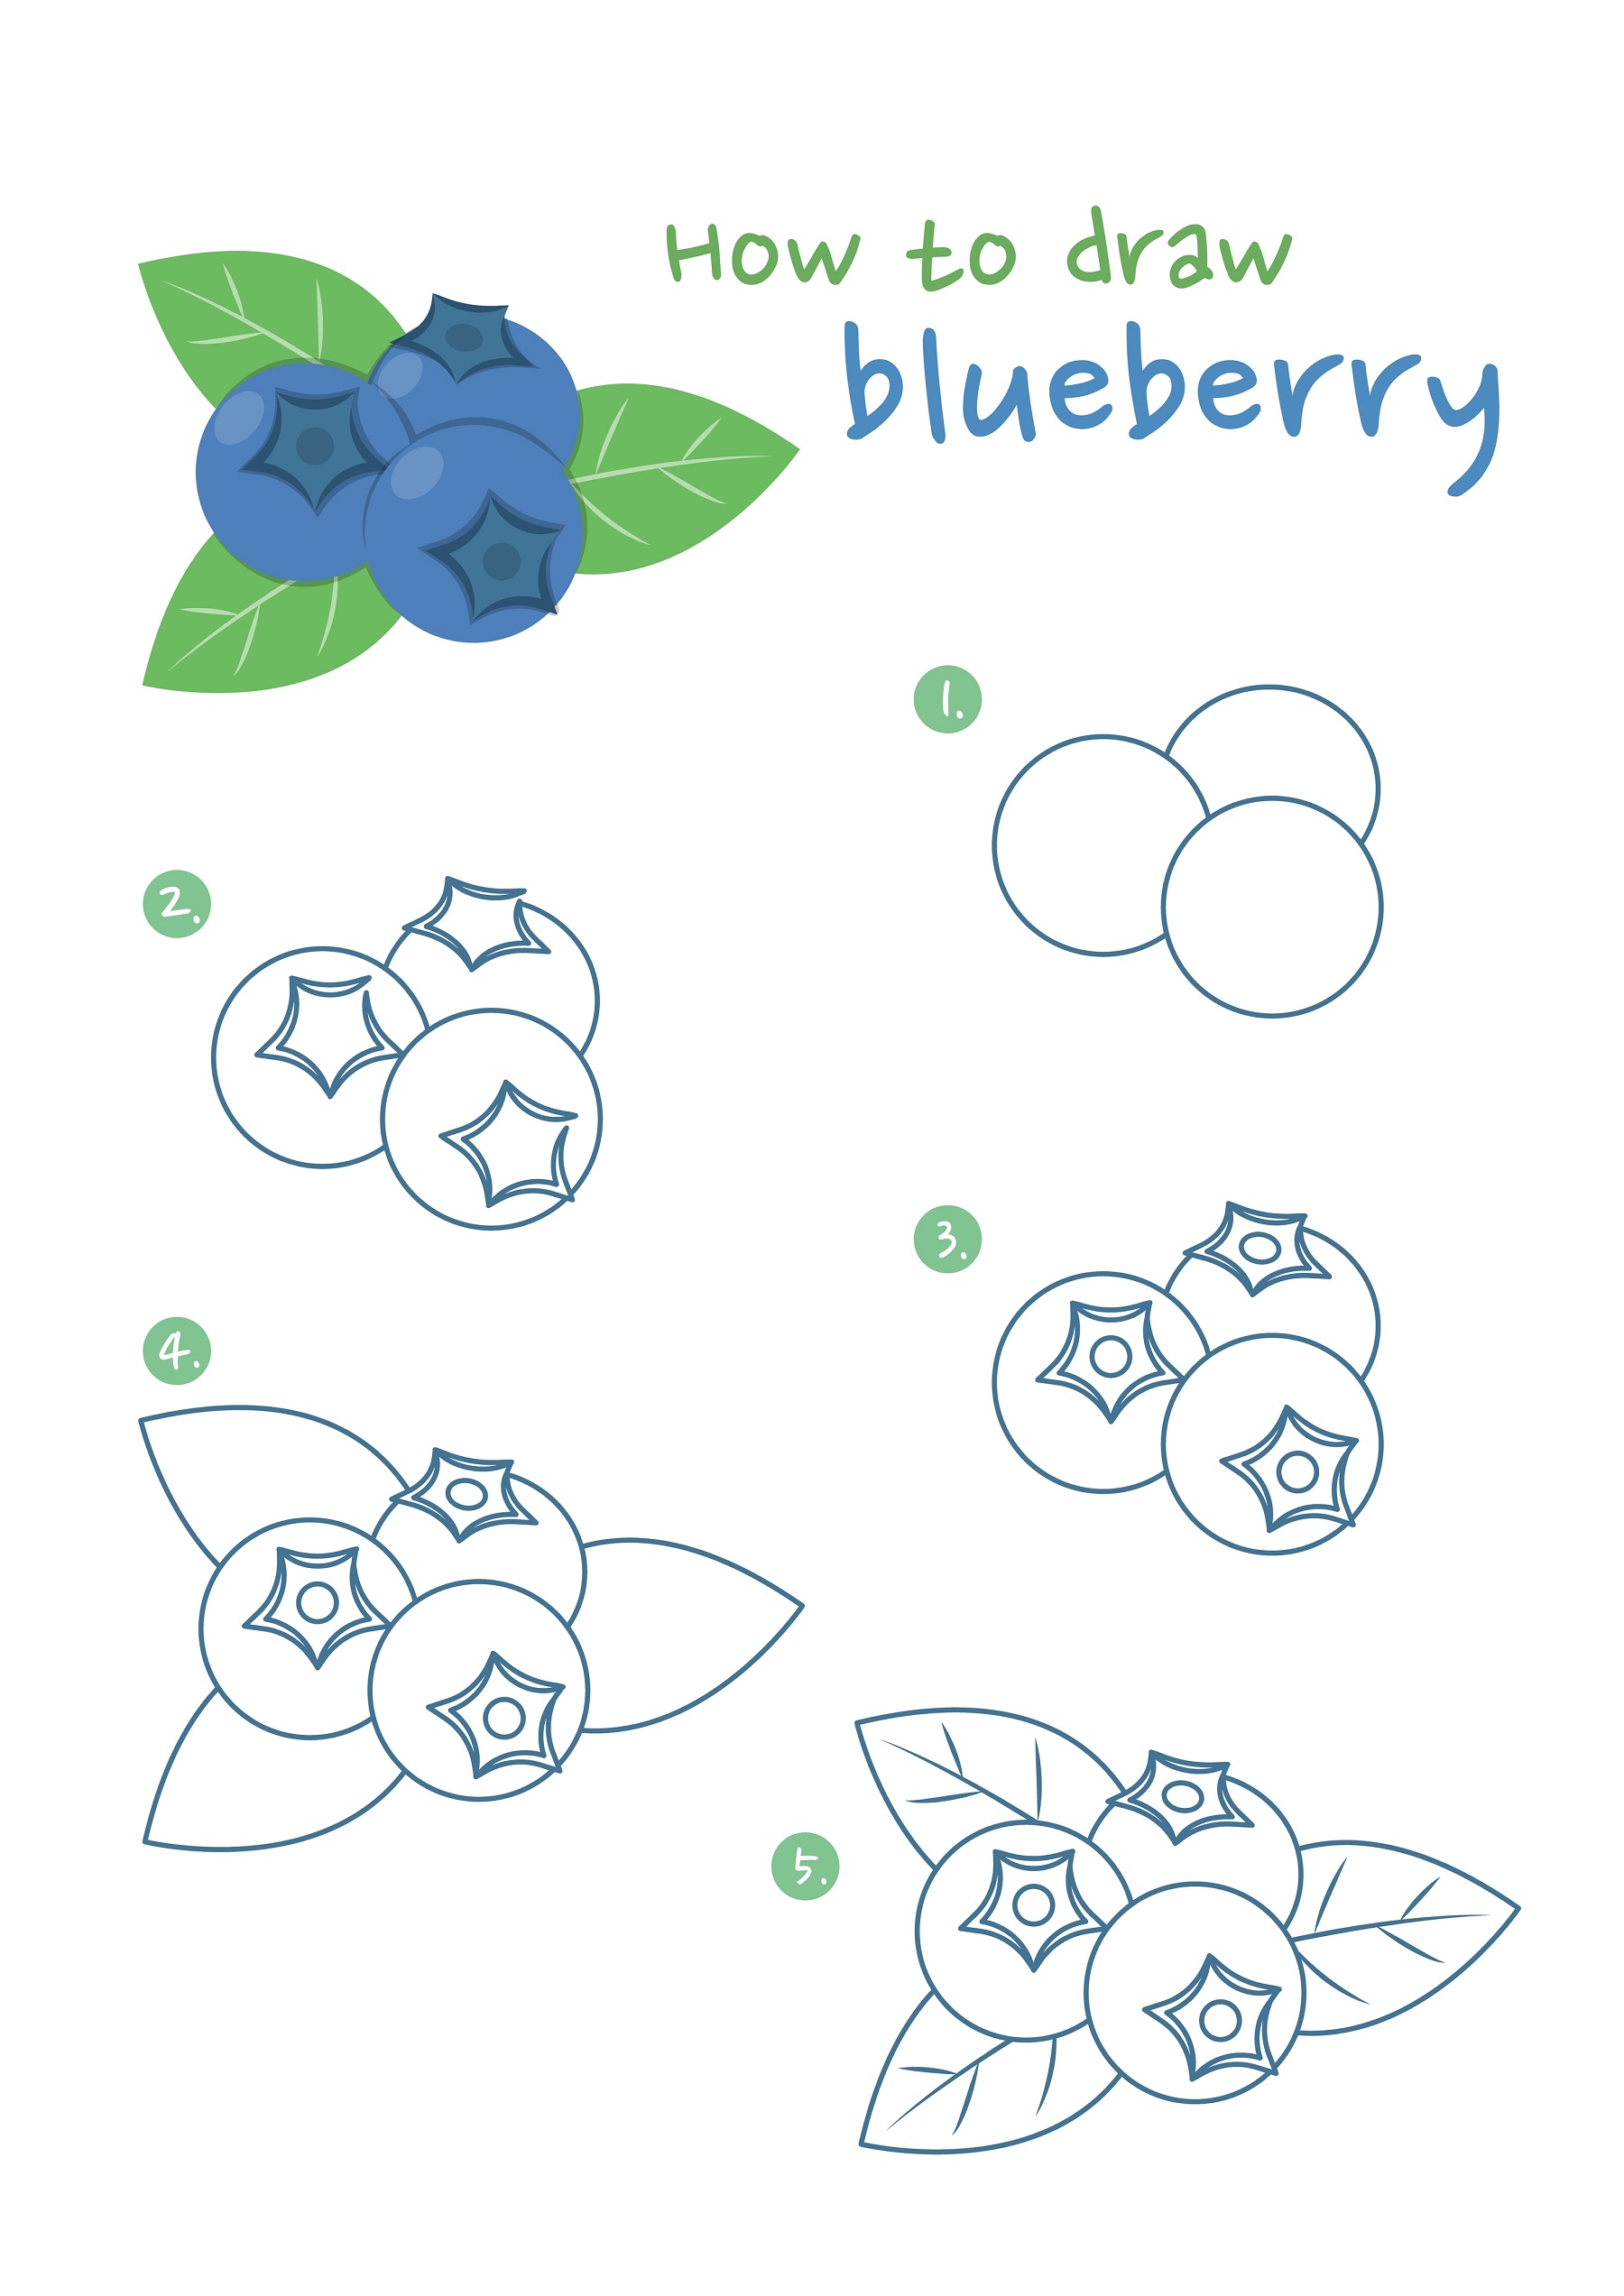 how to draw blueberries - blueberry drawing tutorial